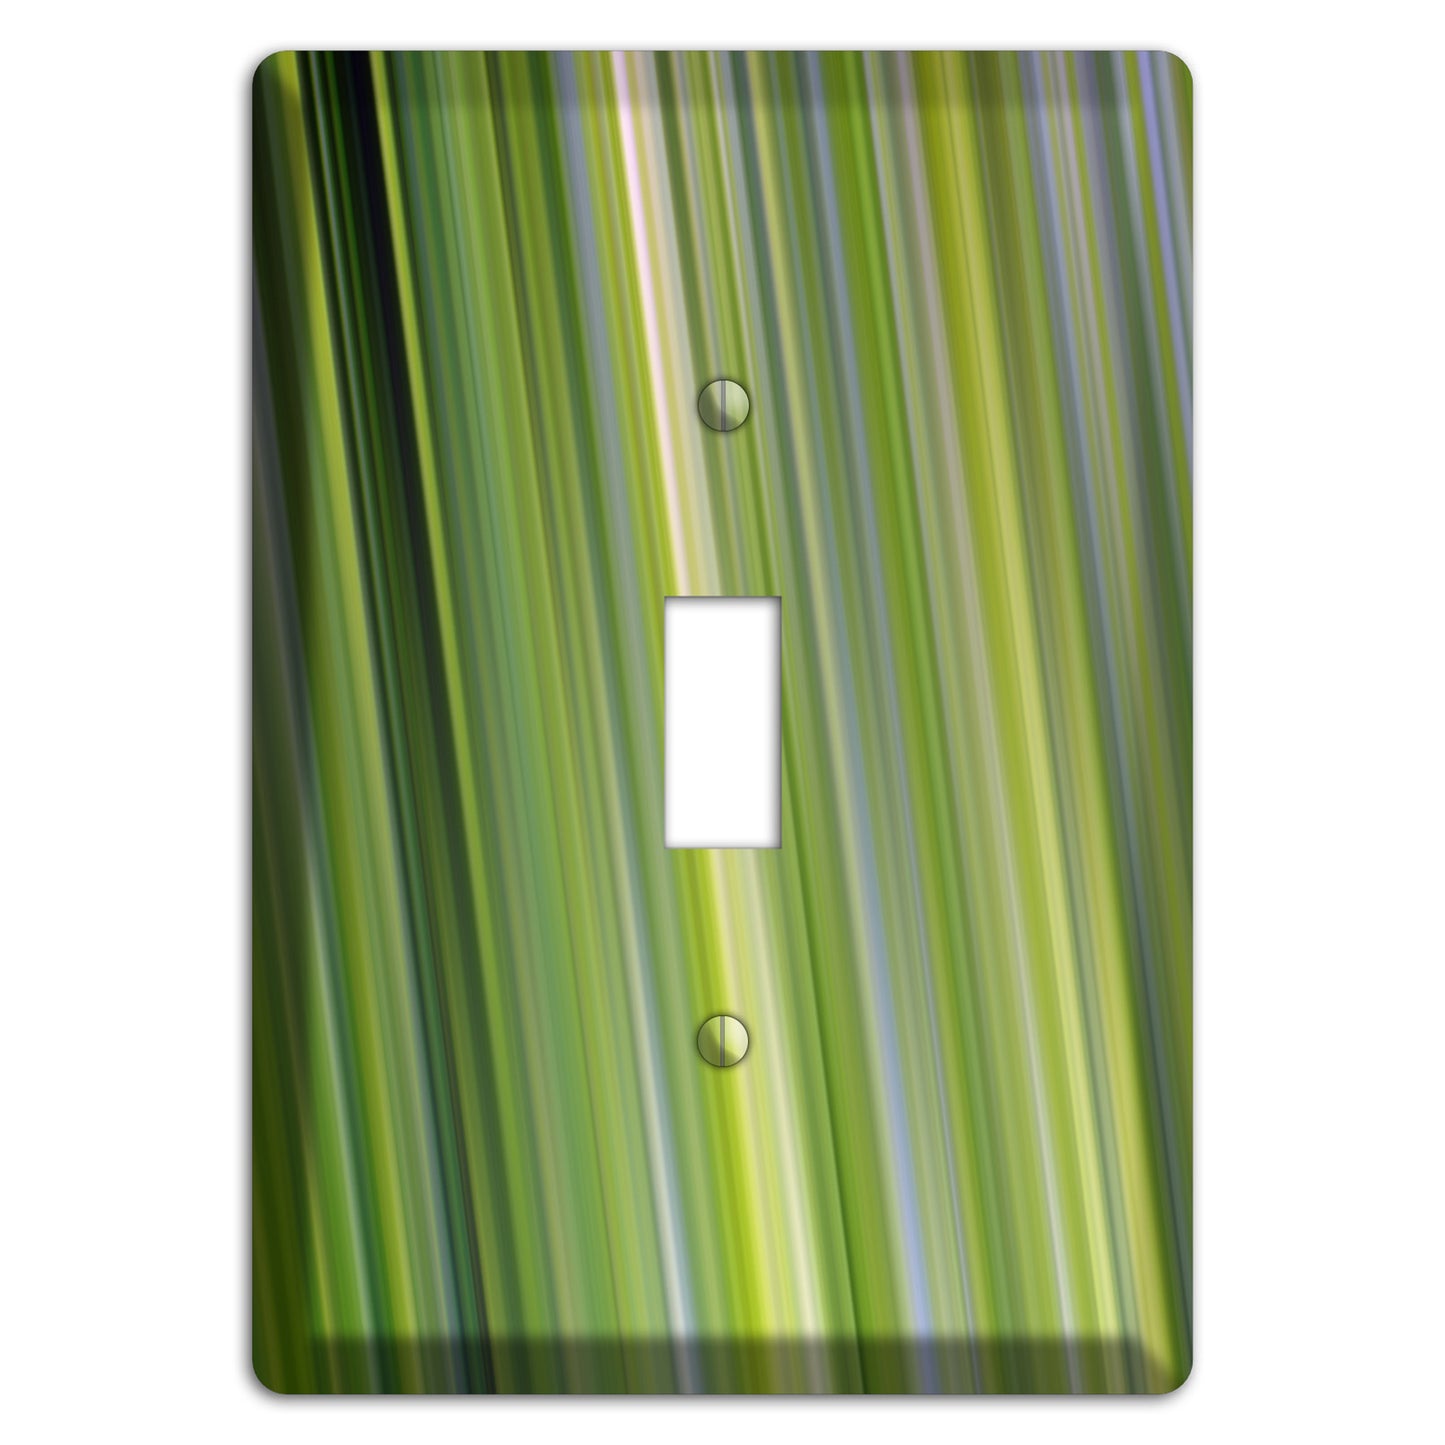 Green Ray of Light Cover Plates